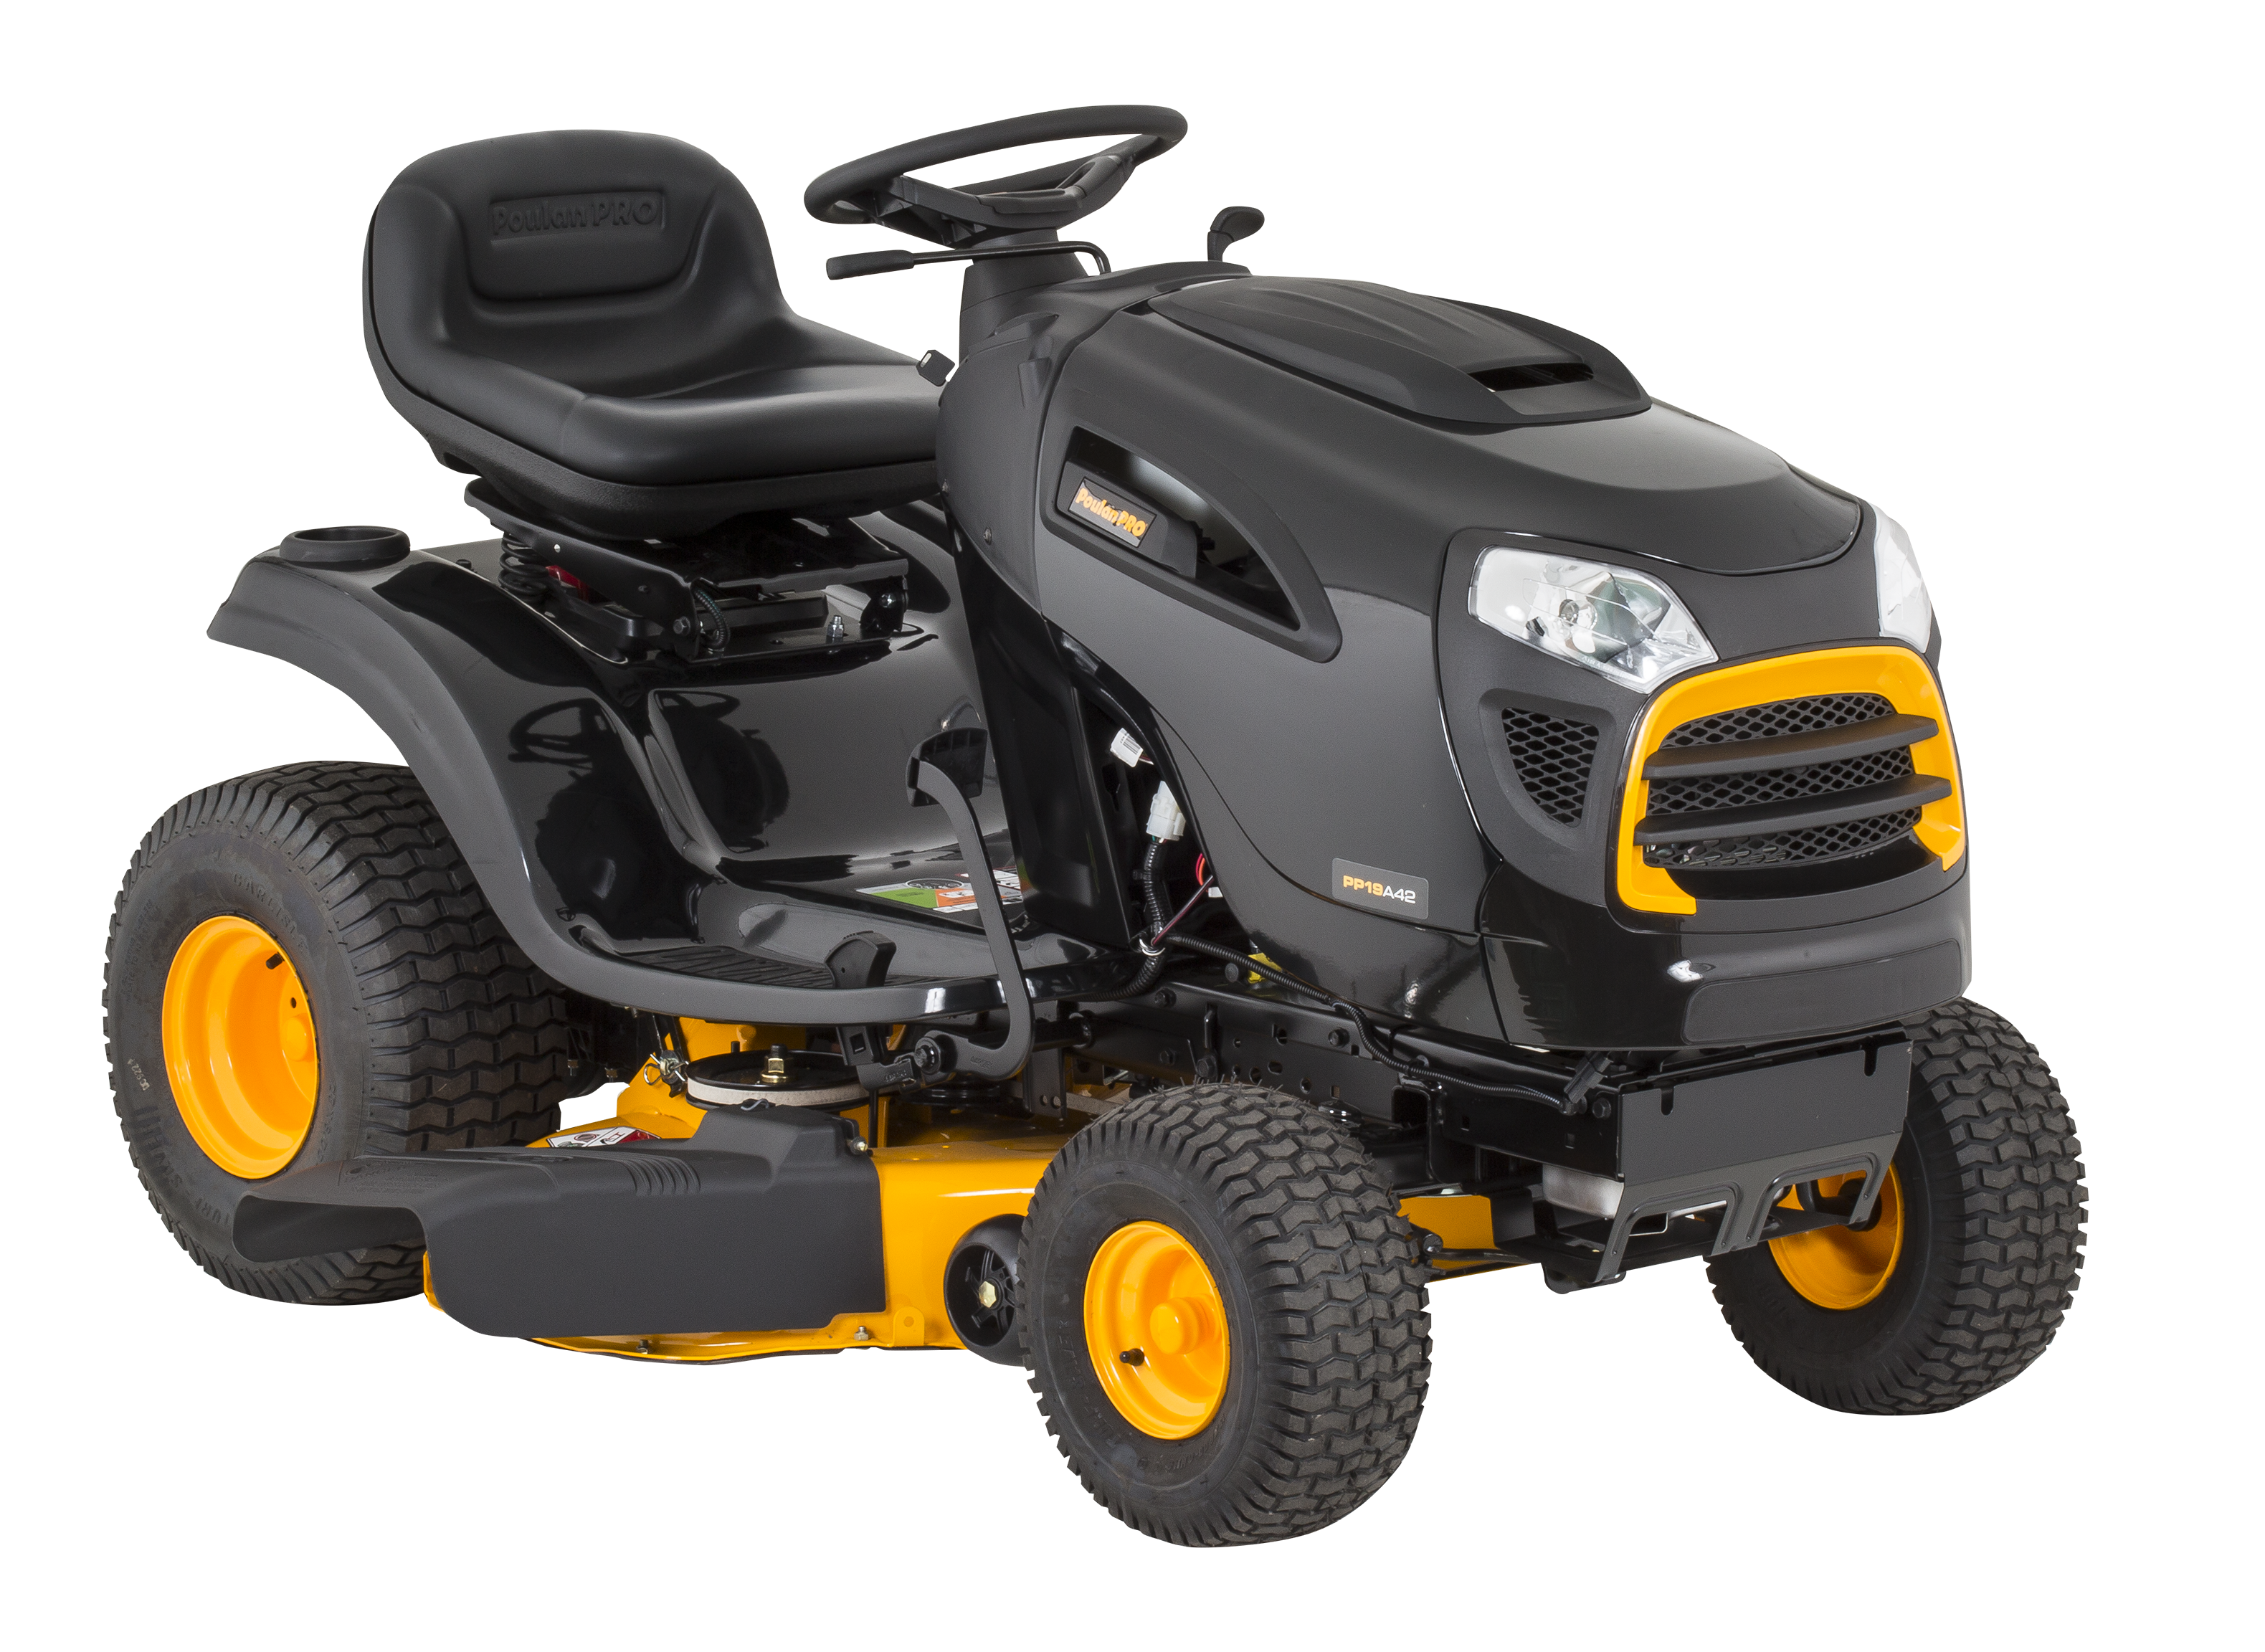 Poulan pro pp19a42 lawn mower & tractor - consumer reports